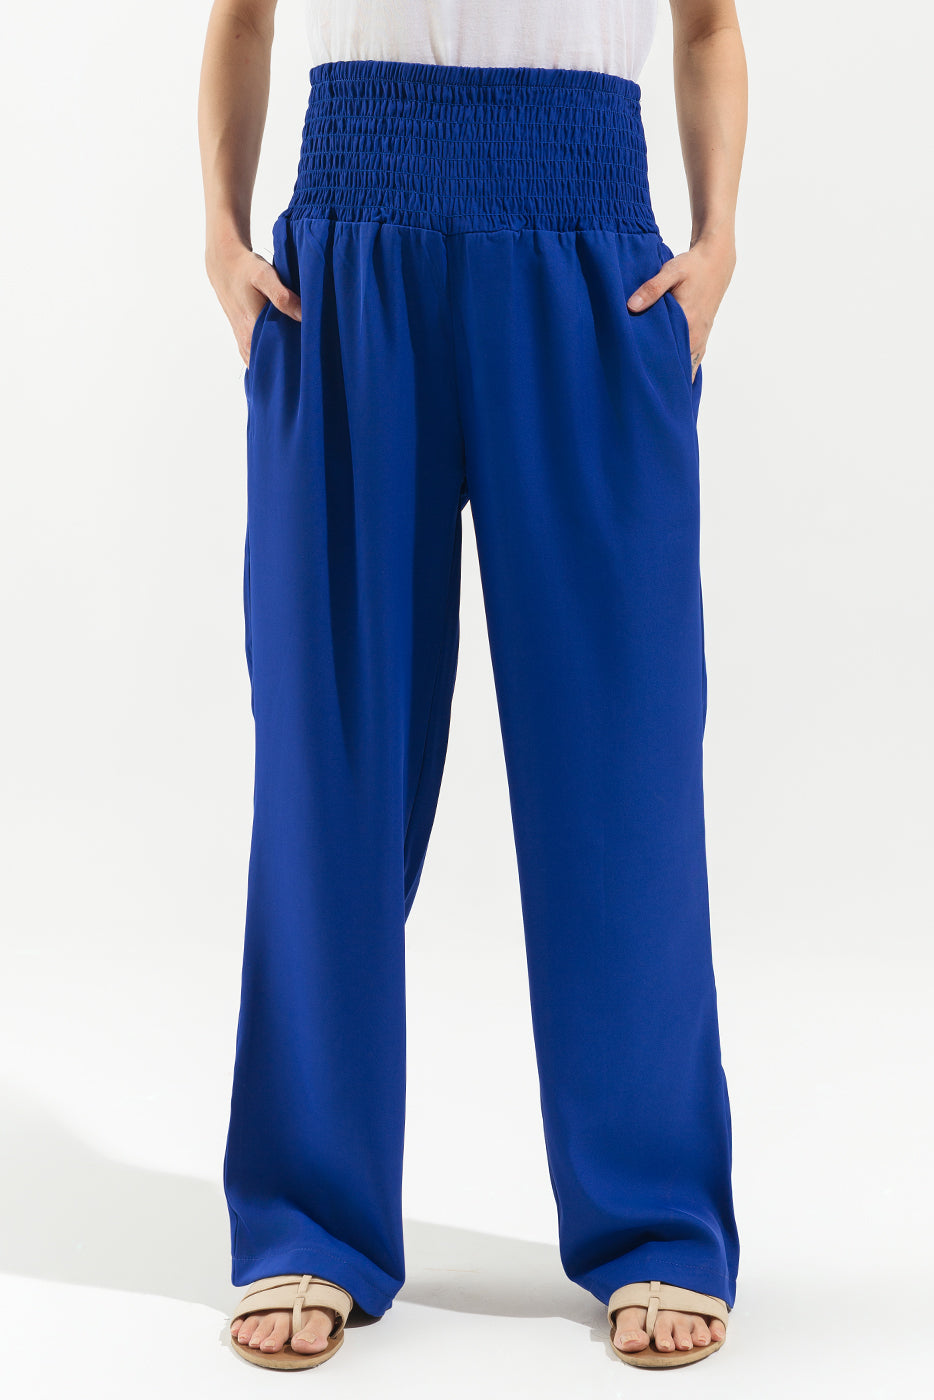 Electric Blue Tailored Pants - BEECHTREE